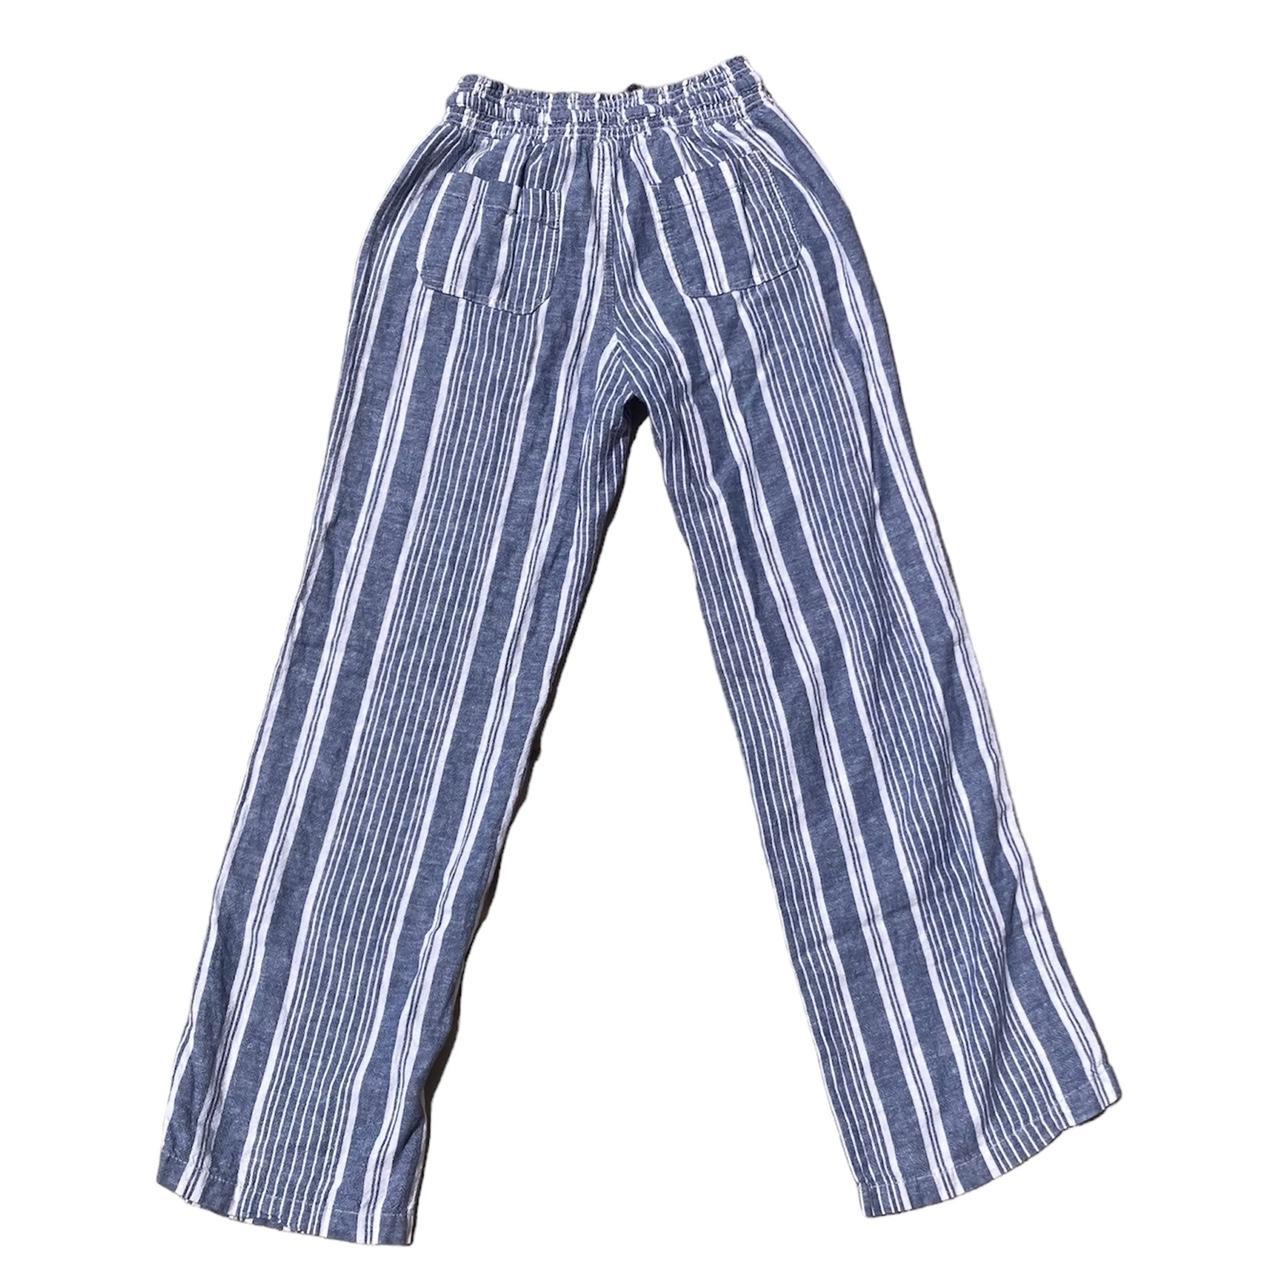 American Heritage Textiles Women's Blue and White Trousers (3)